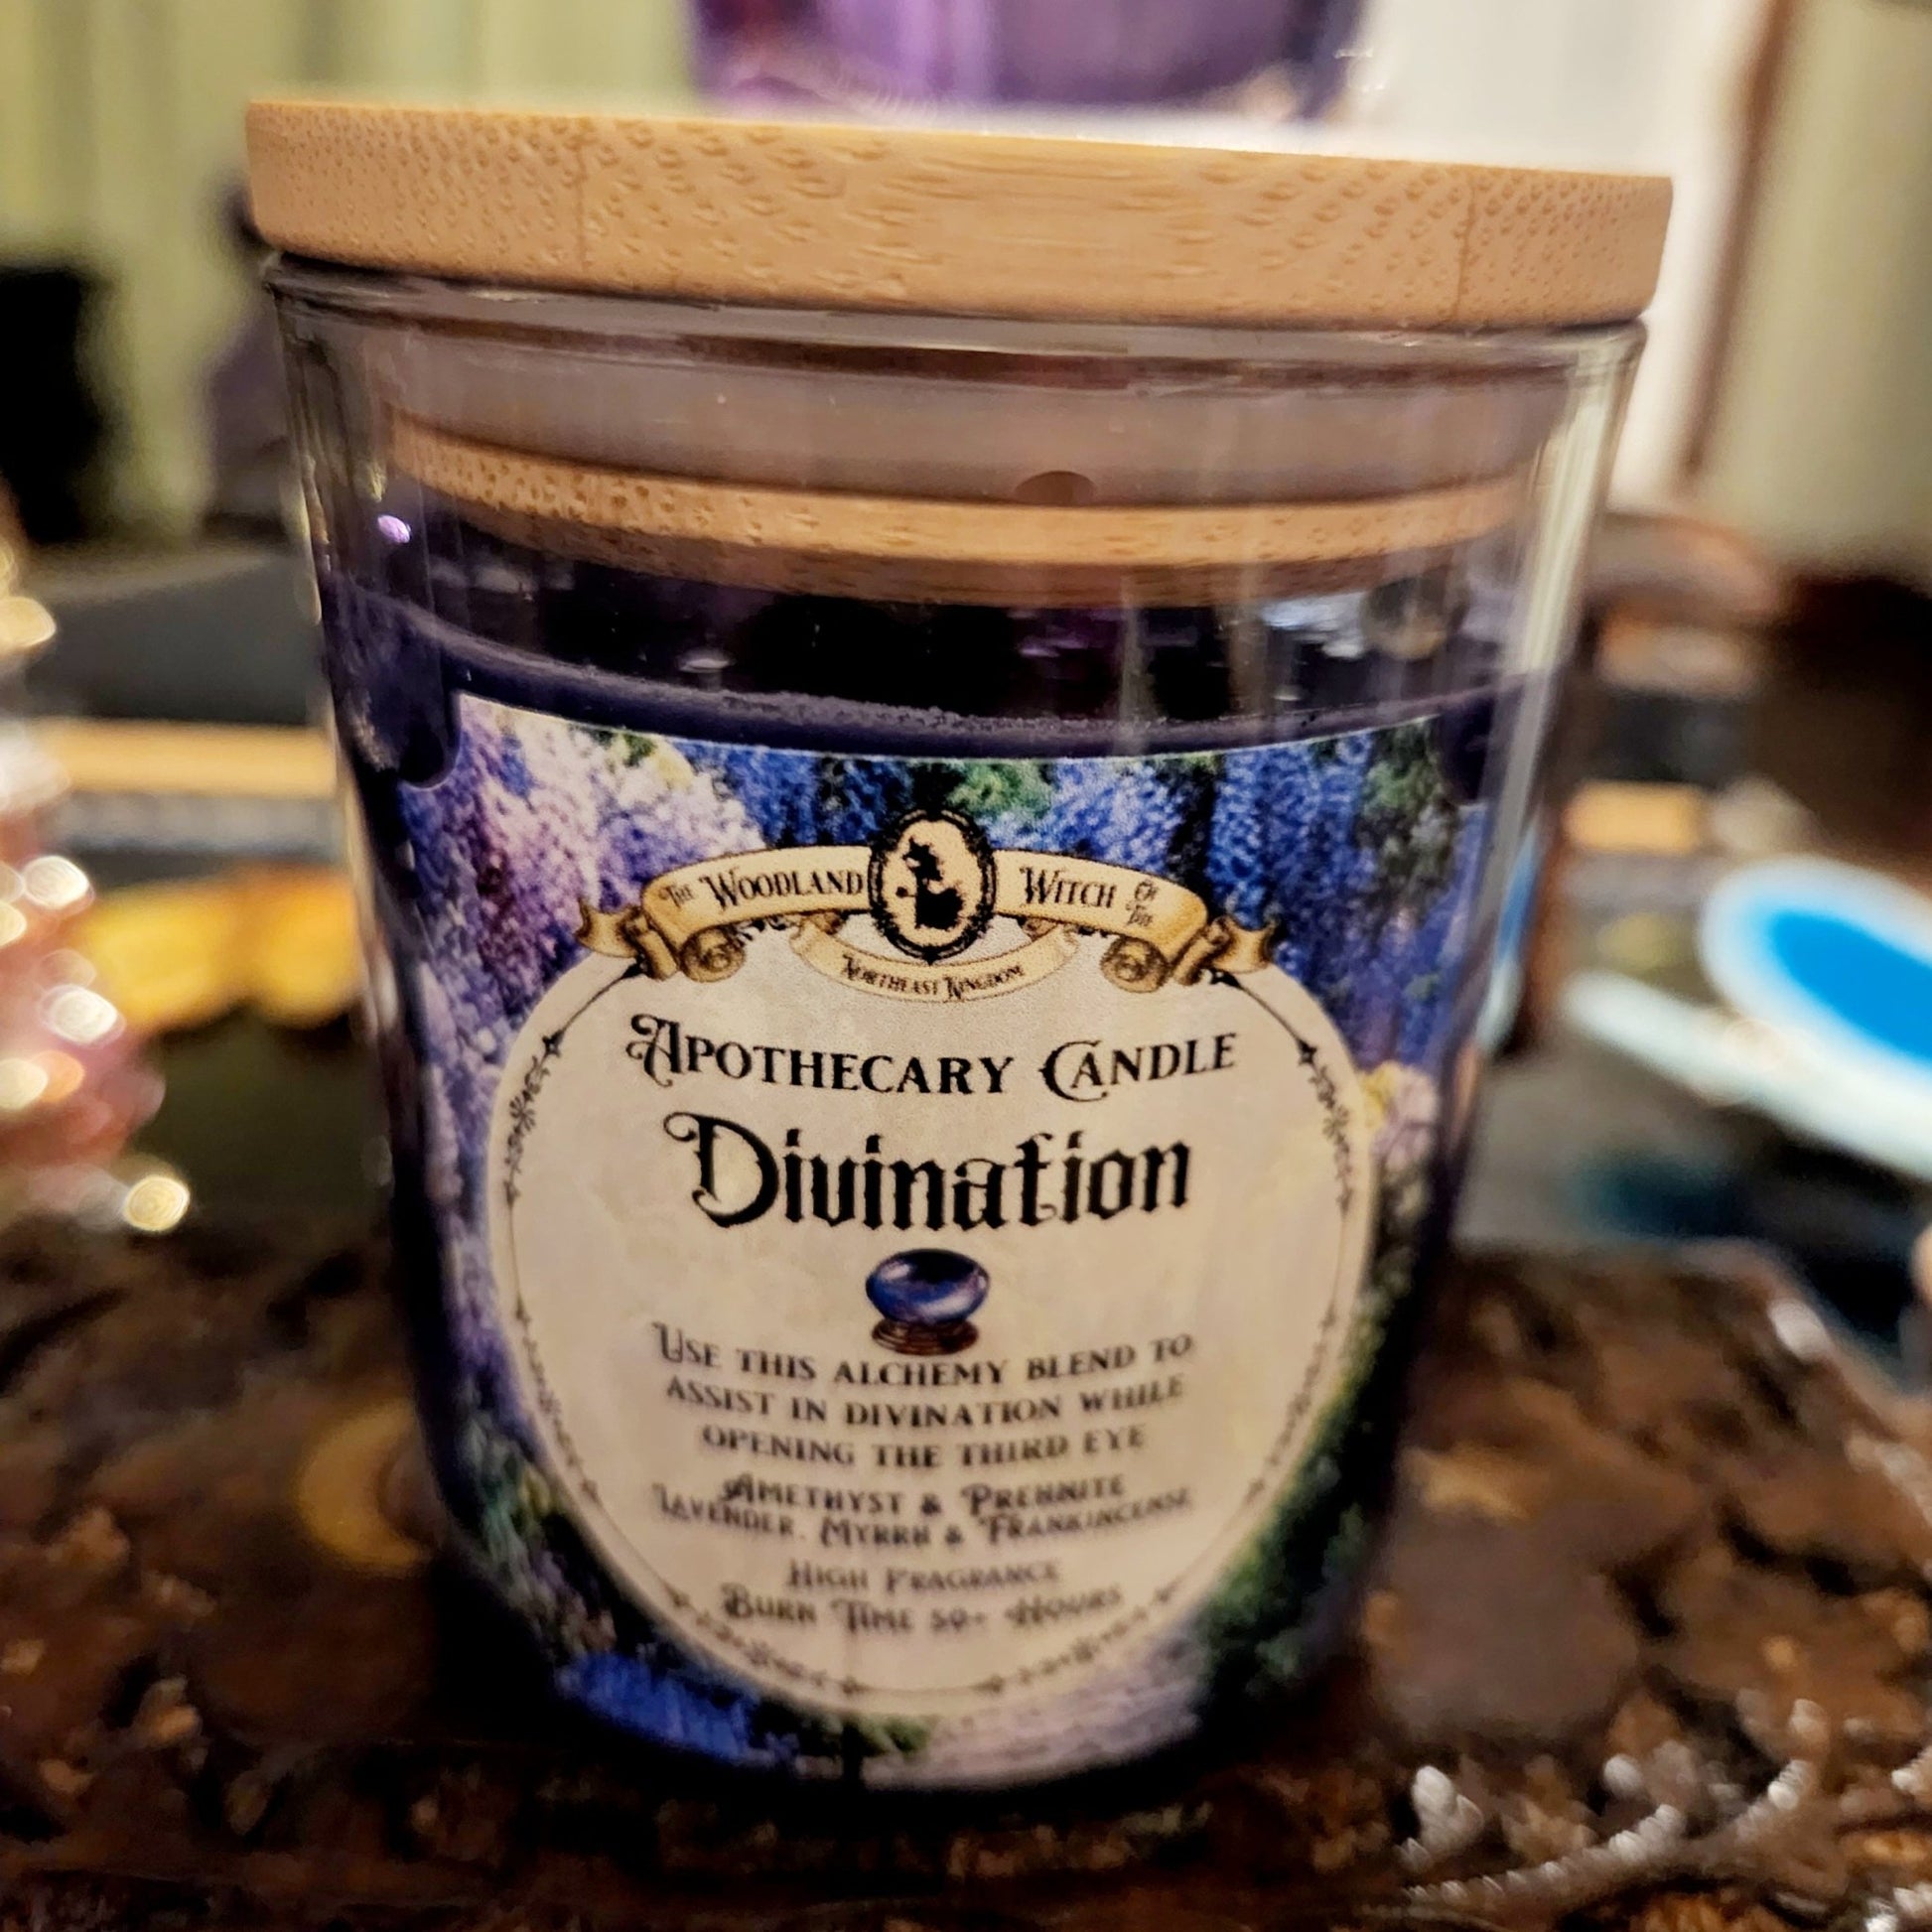 DIVINATION APOTHECARY CANDLE Woodland Witchcraft